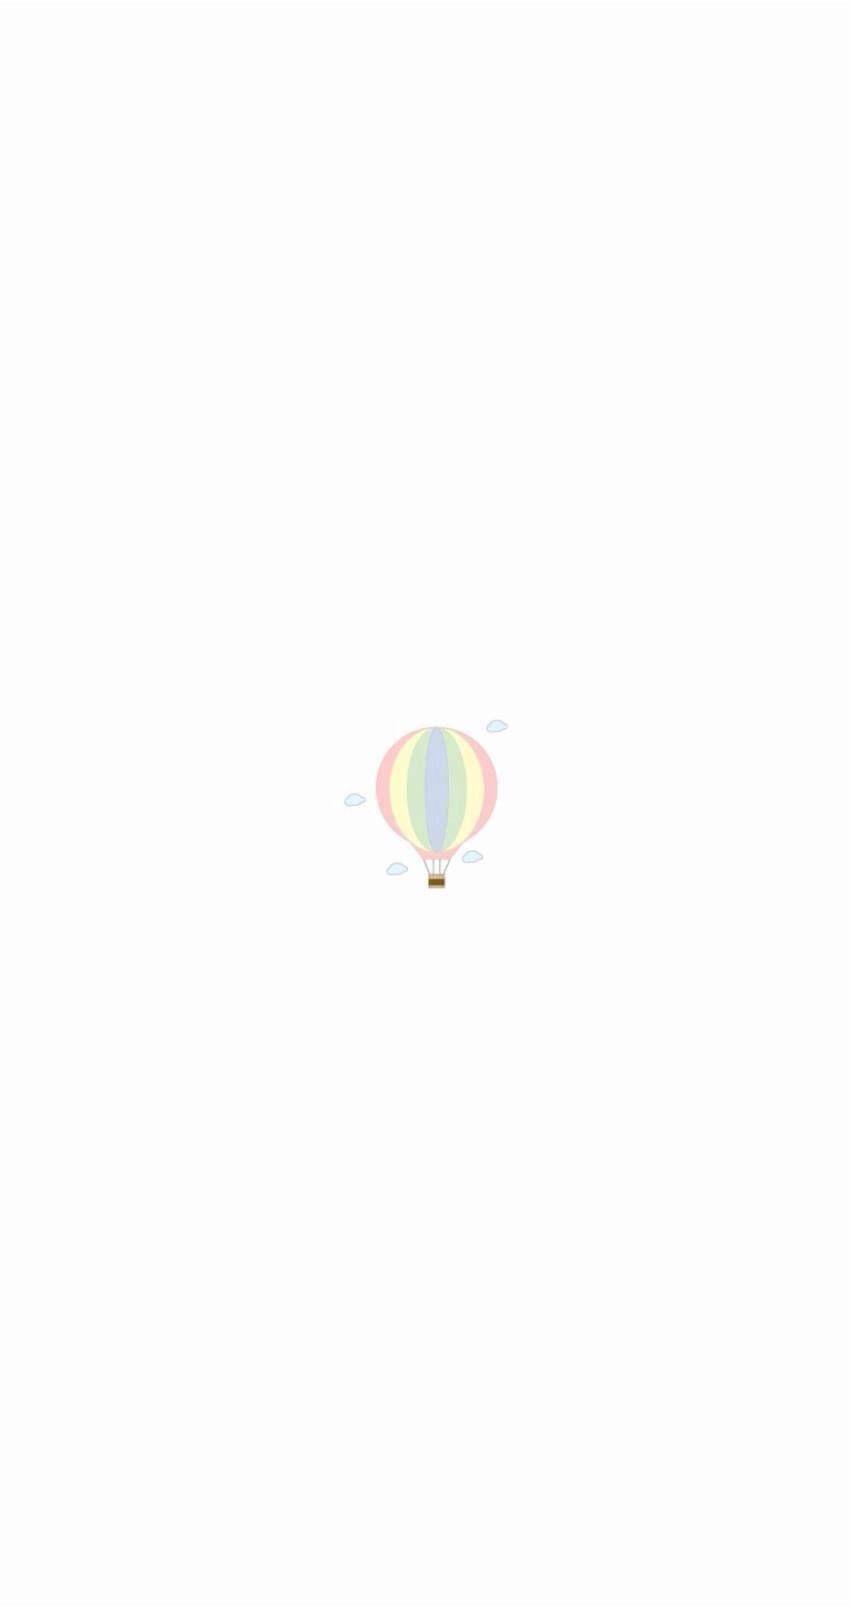 A hot air balloon in a white background - Pastel minimalist